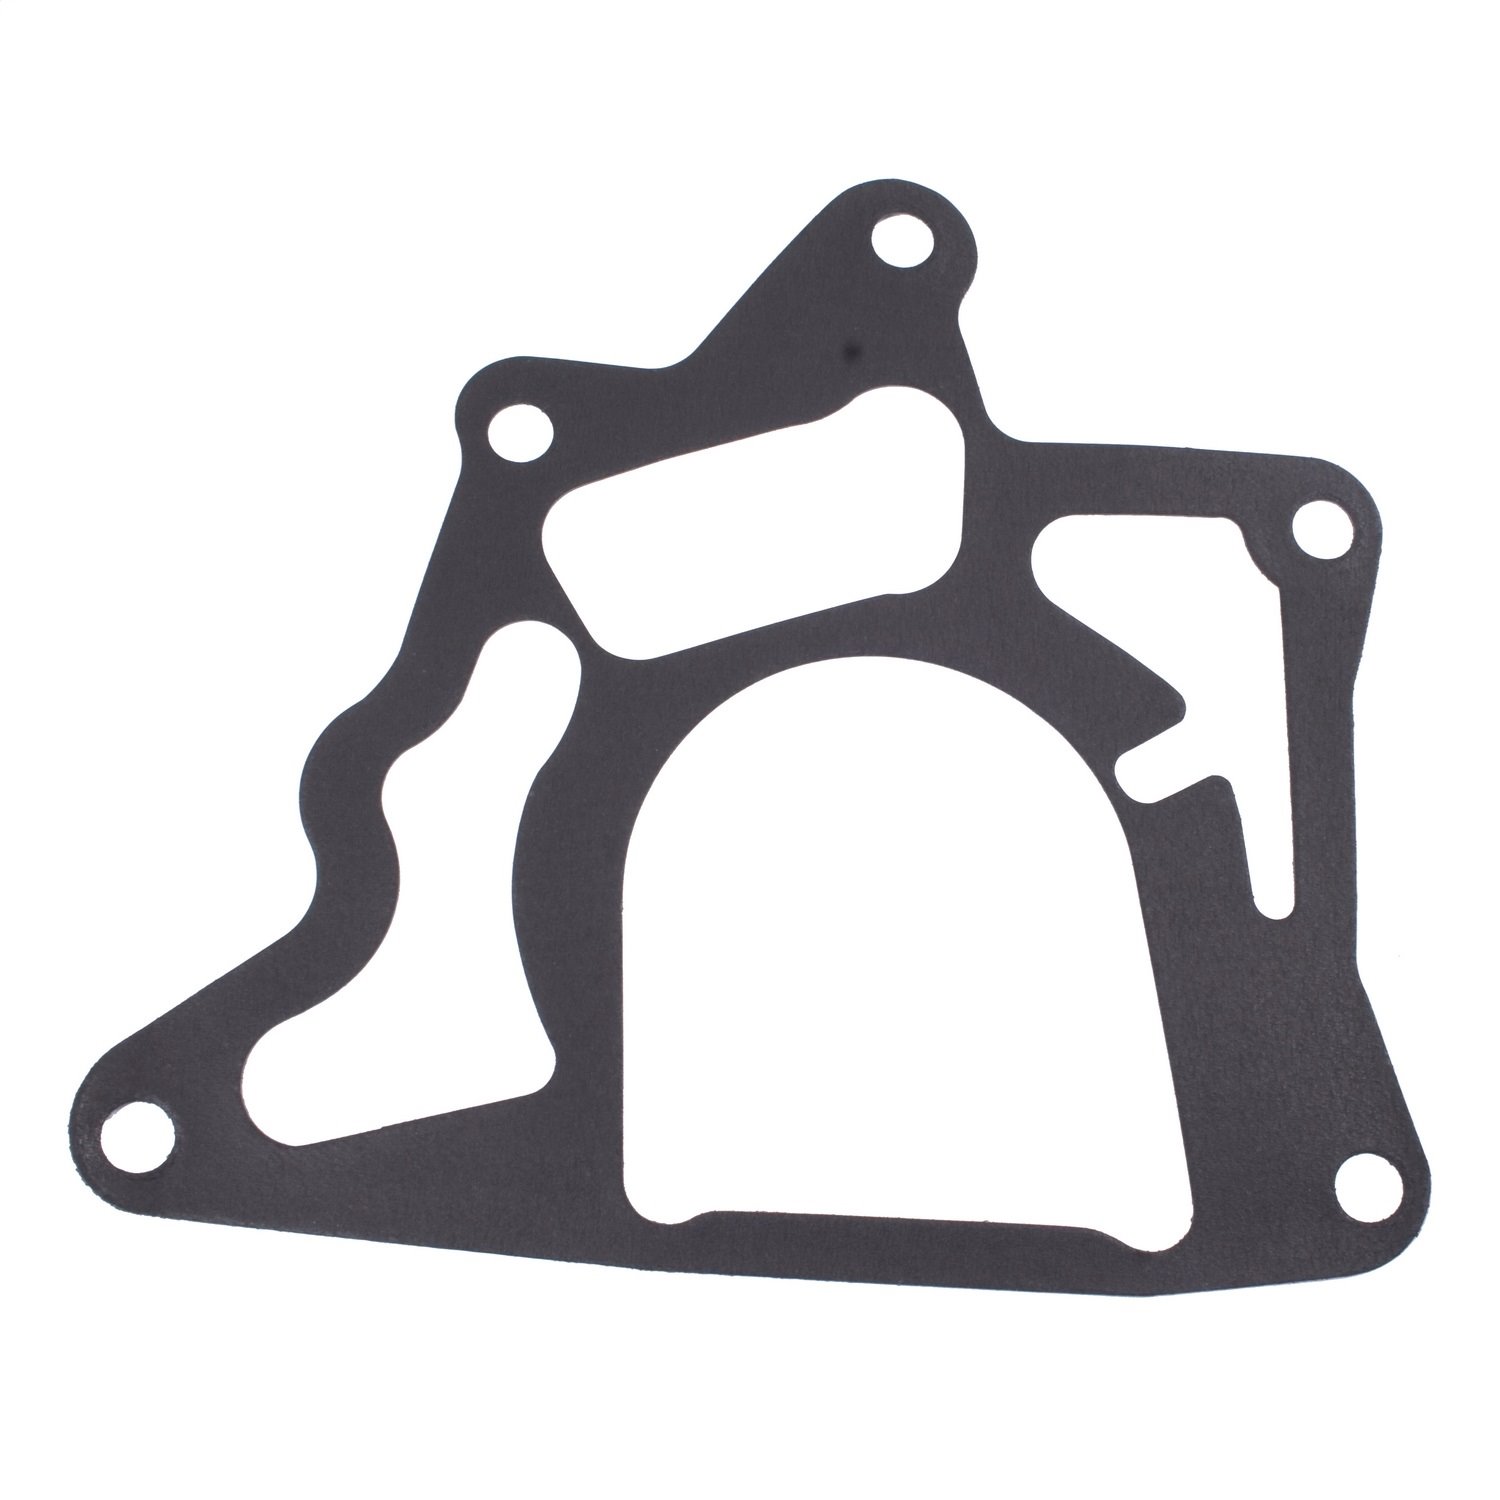 Replacement gasket from Omix-ADA for Dana 18 transfer case between transfer case and T-90 trans